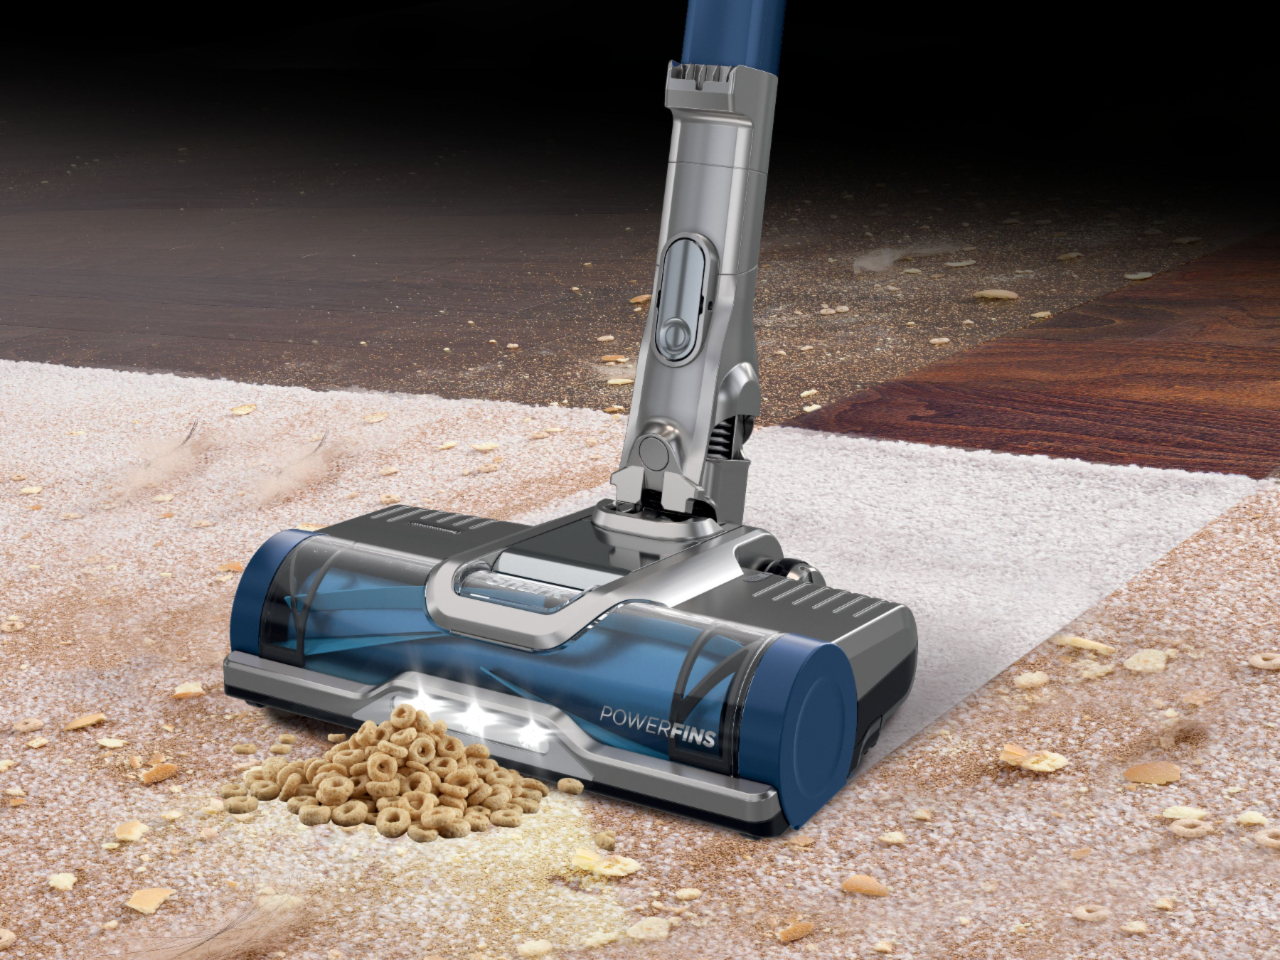 Dyson vacuum deals: Save on Reviewed-approved vacuum cleaners this Prime  Day - Reviewed